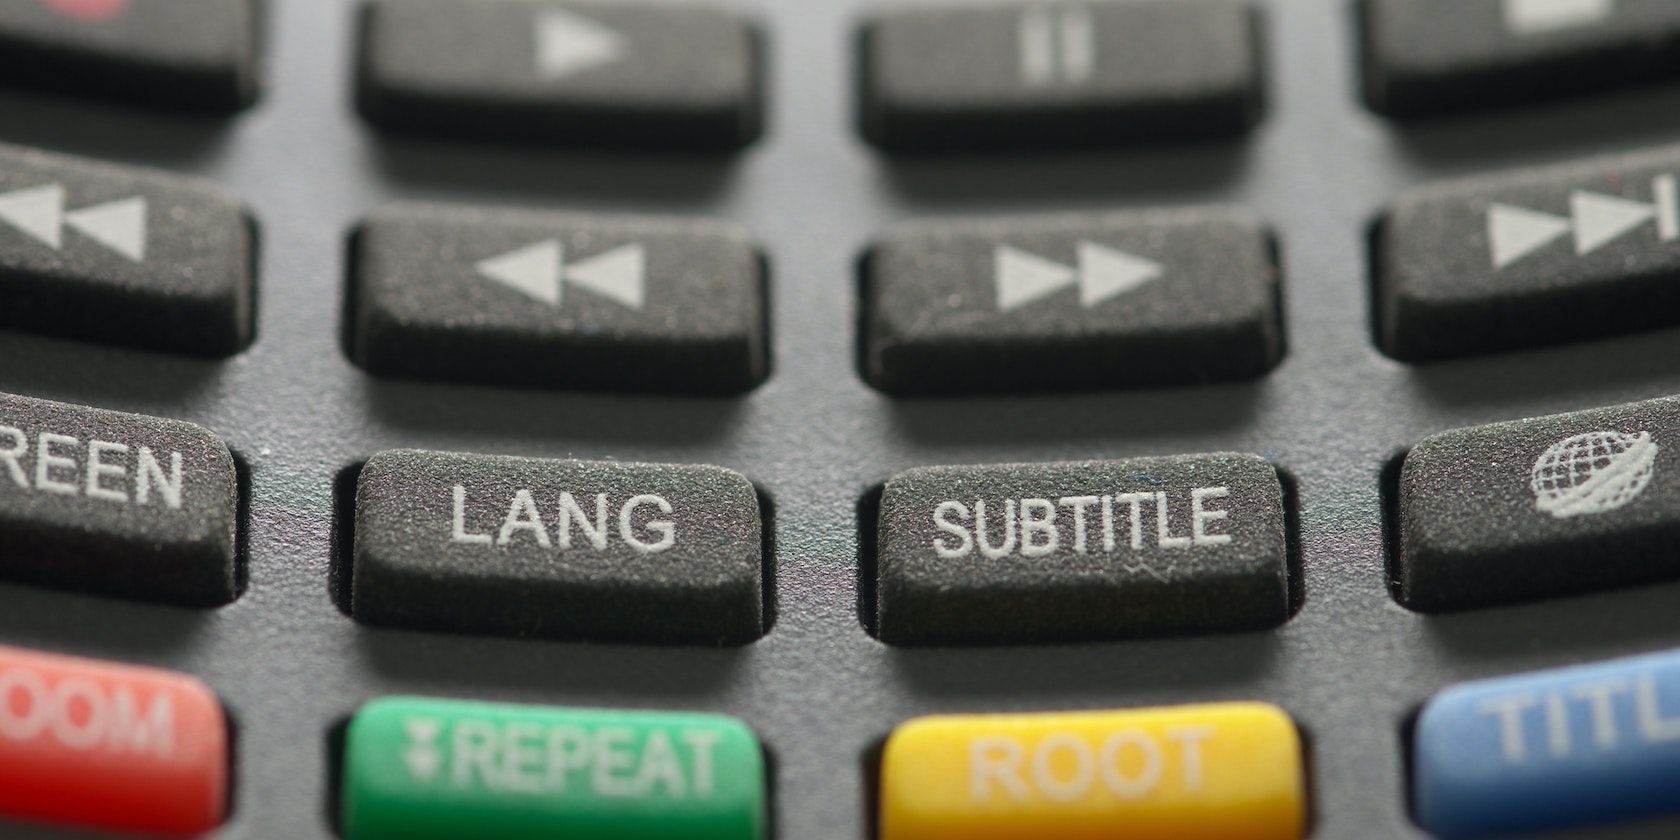 An extreme close-up photo of a TV remote control featuring a 